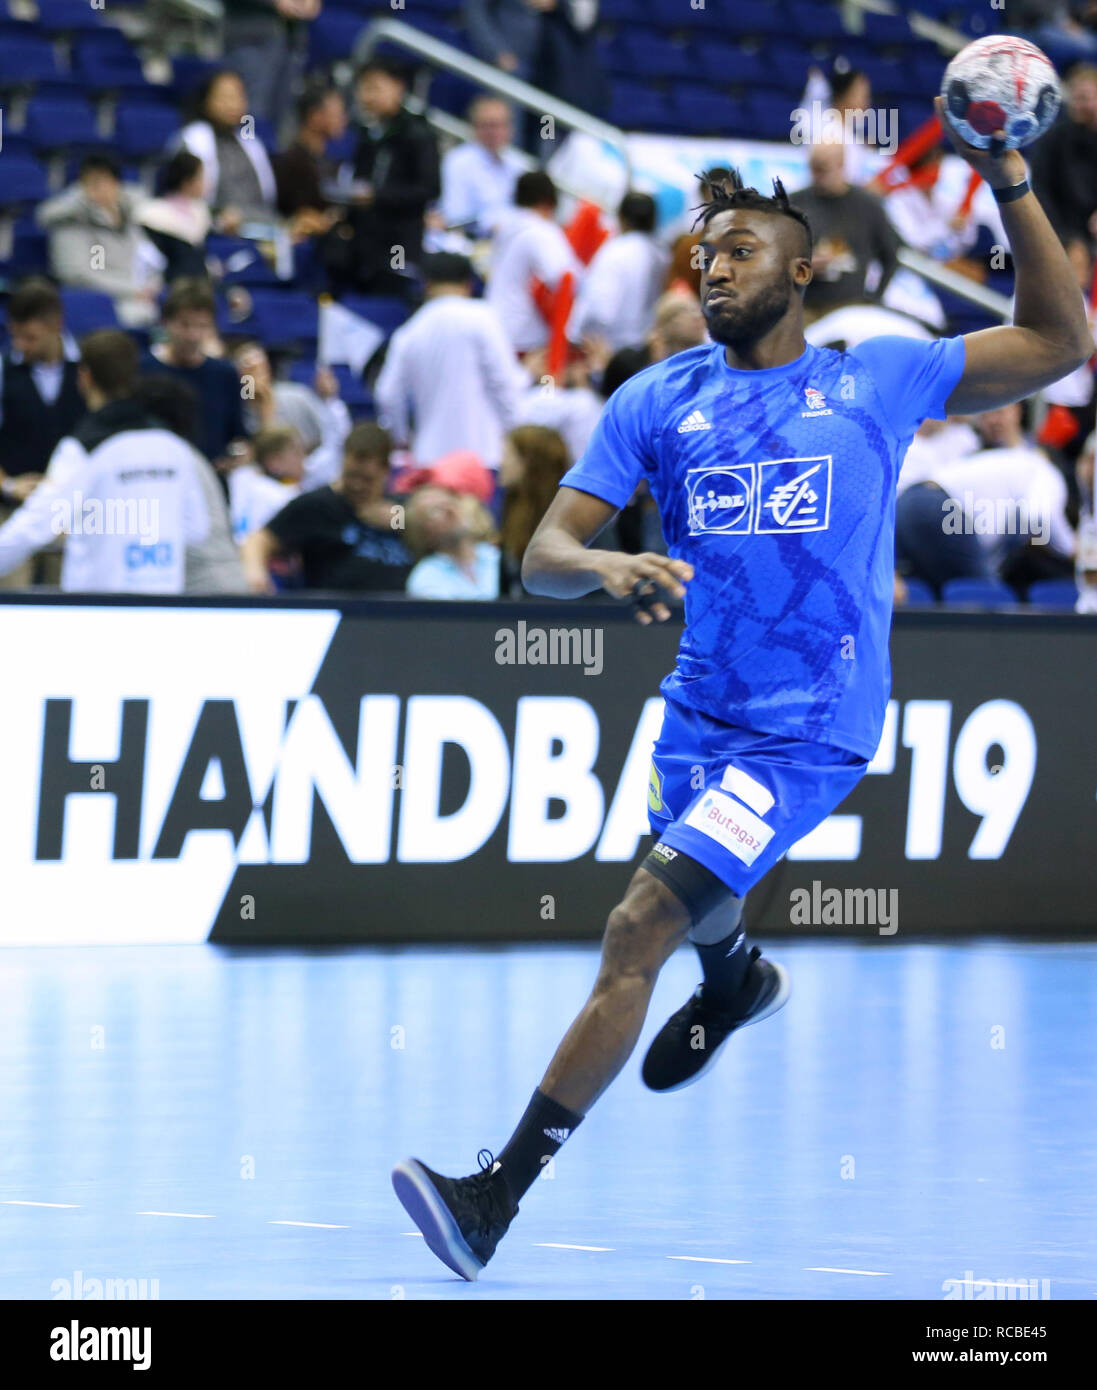 Berlin, Germany. 14th Jan, 2019. Handball IHF Men's World Championship: France right wing Luc Abalo during the warm-up before the game Credit: Mickael Chavet/Alamy Live News Stock Photo